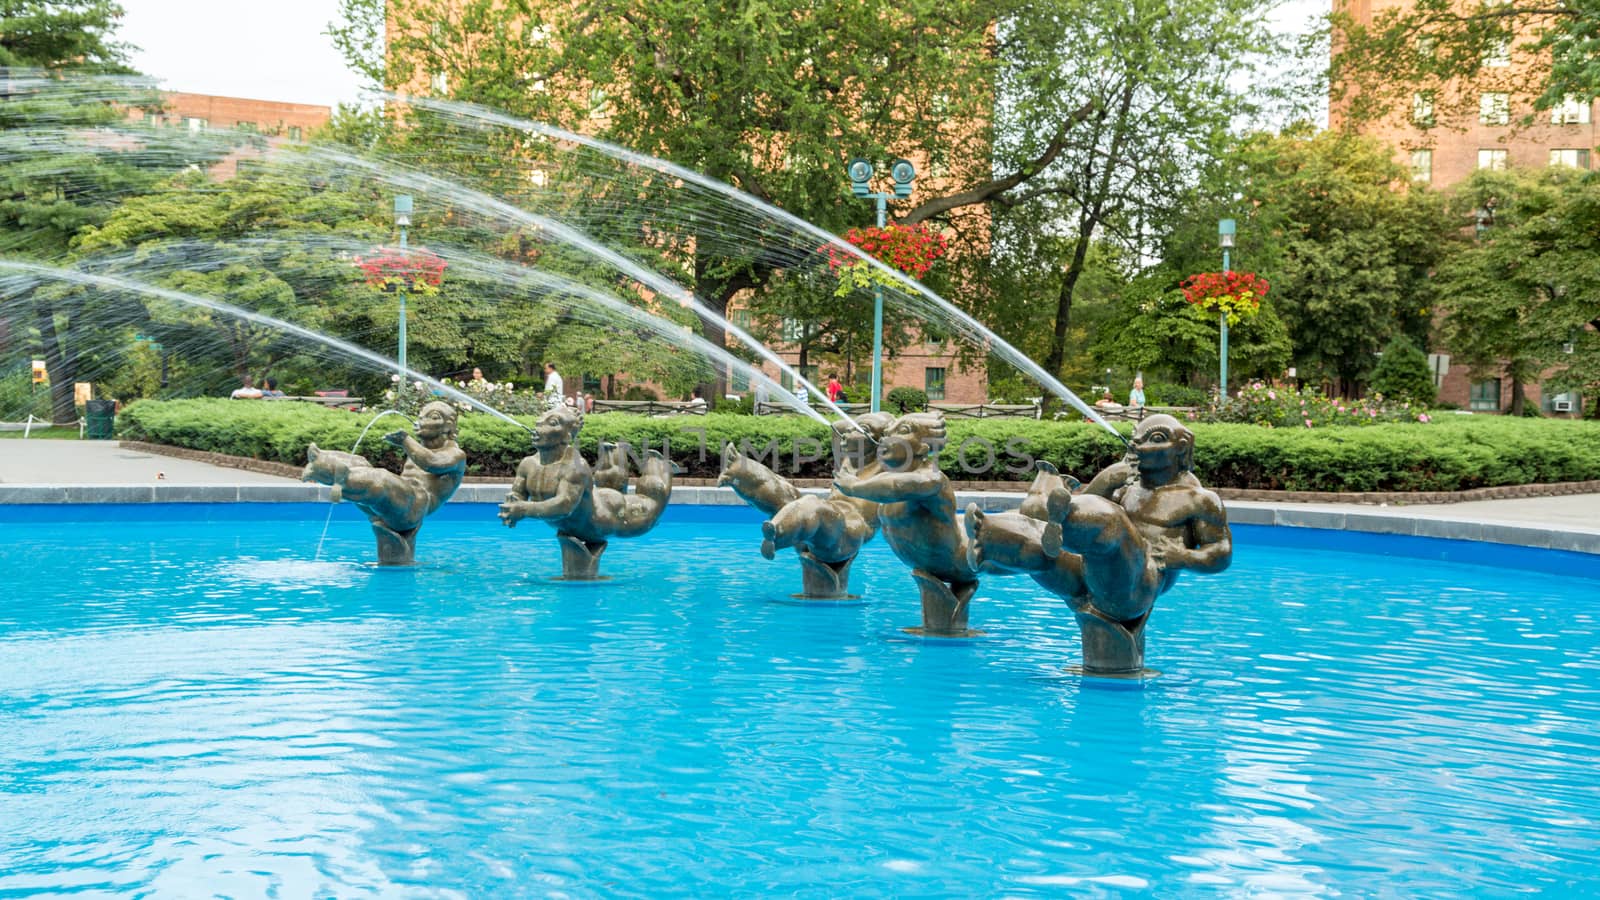 Statues spraying water at a fountain in a park located in Parkchester neighbourhood of Bronk, New York